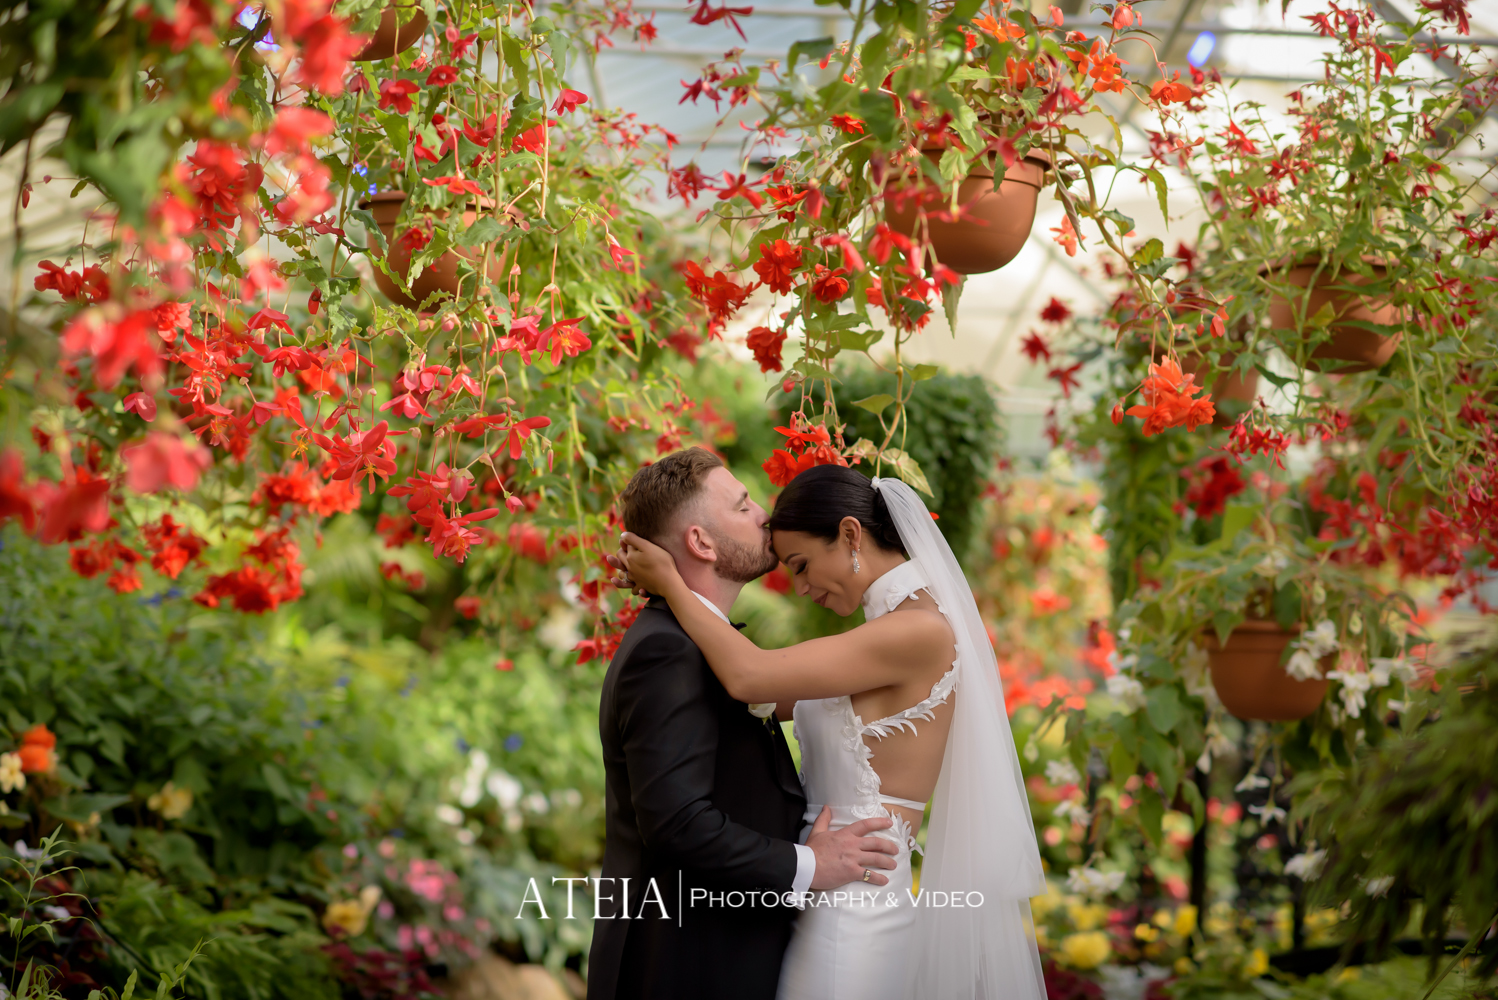 , Sara &#038; Dominic&#8217;s wedding photography at Oliva Social captured by ATEIA Photography &#038; Video